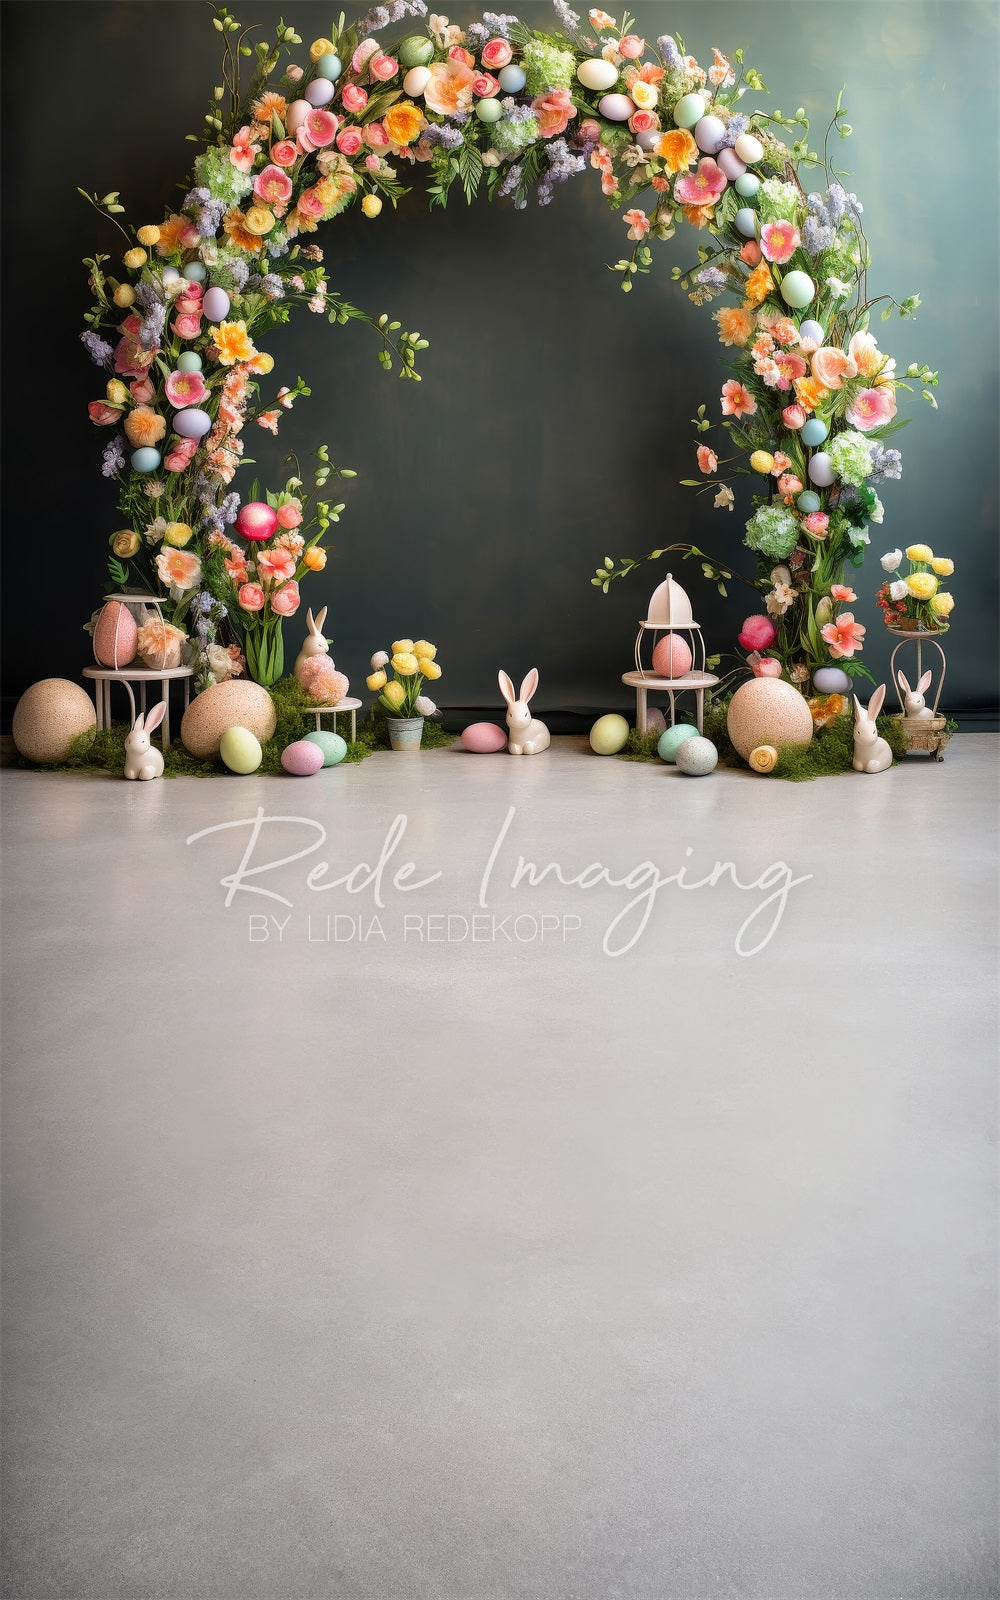 Kate Sweep Easter Eggs Bunny Colorful Flowers Arch Backdrop Designed by Lidia Redekopp